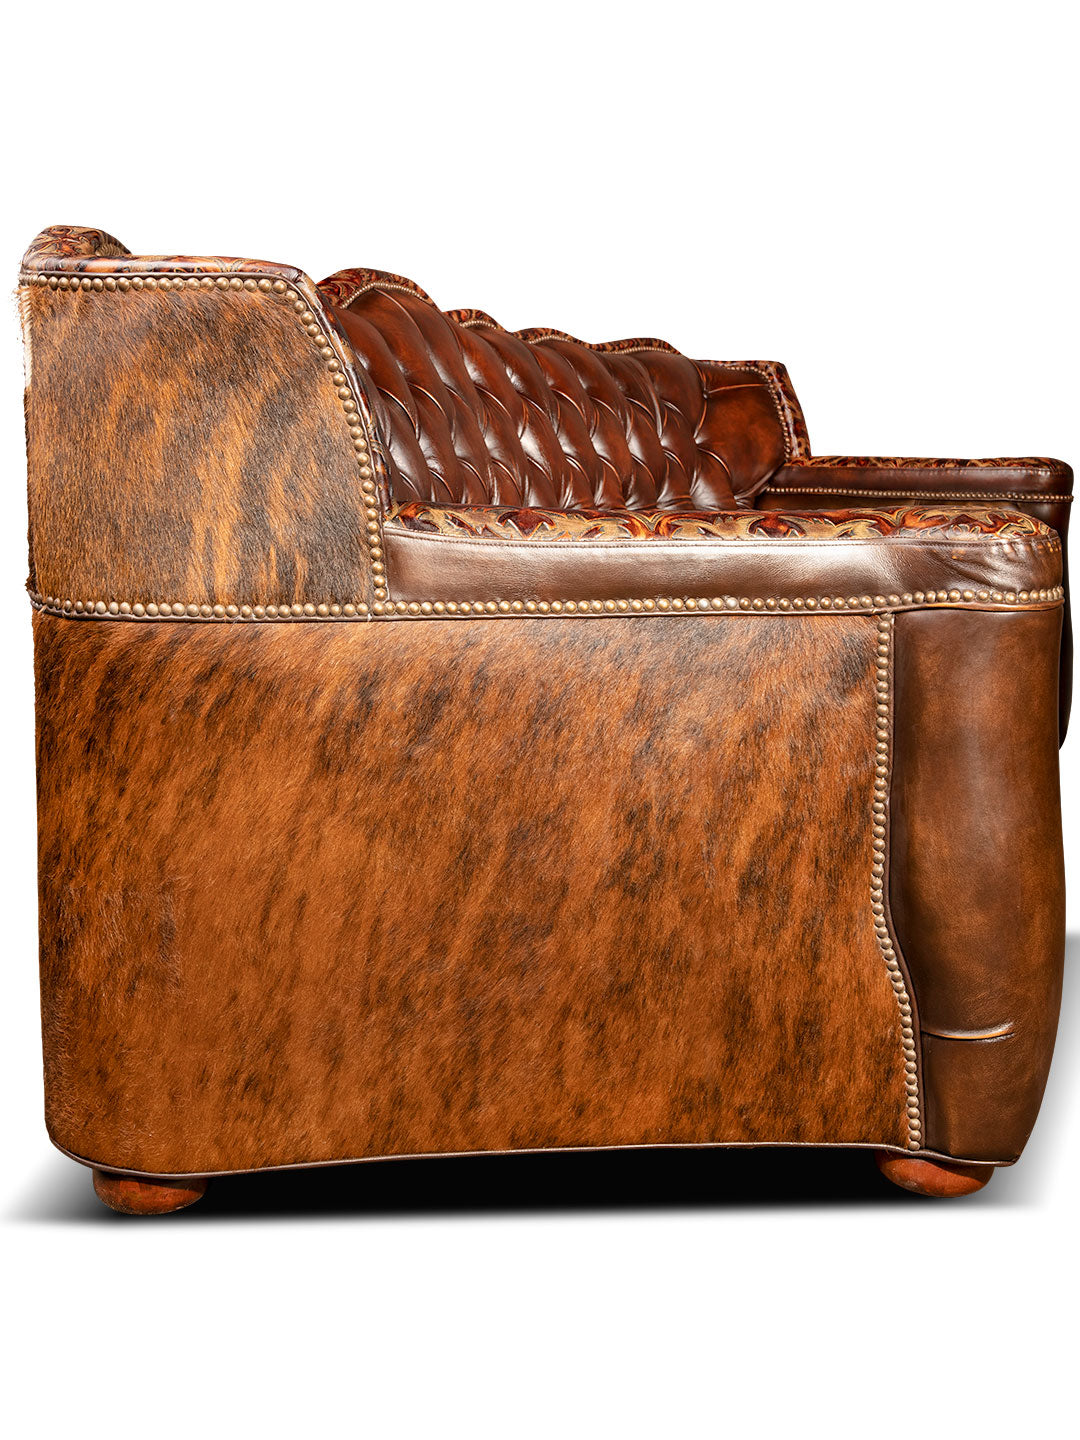 side view of luxurious brown leather/cowhide tufted sofa